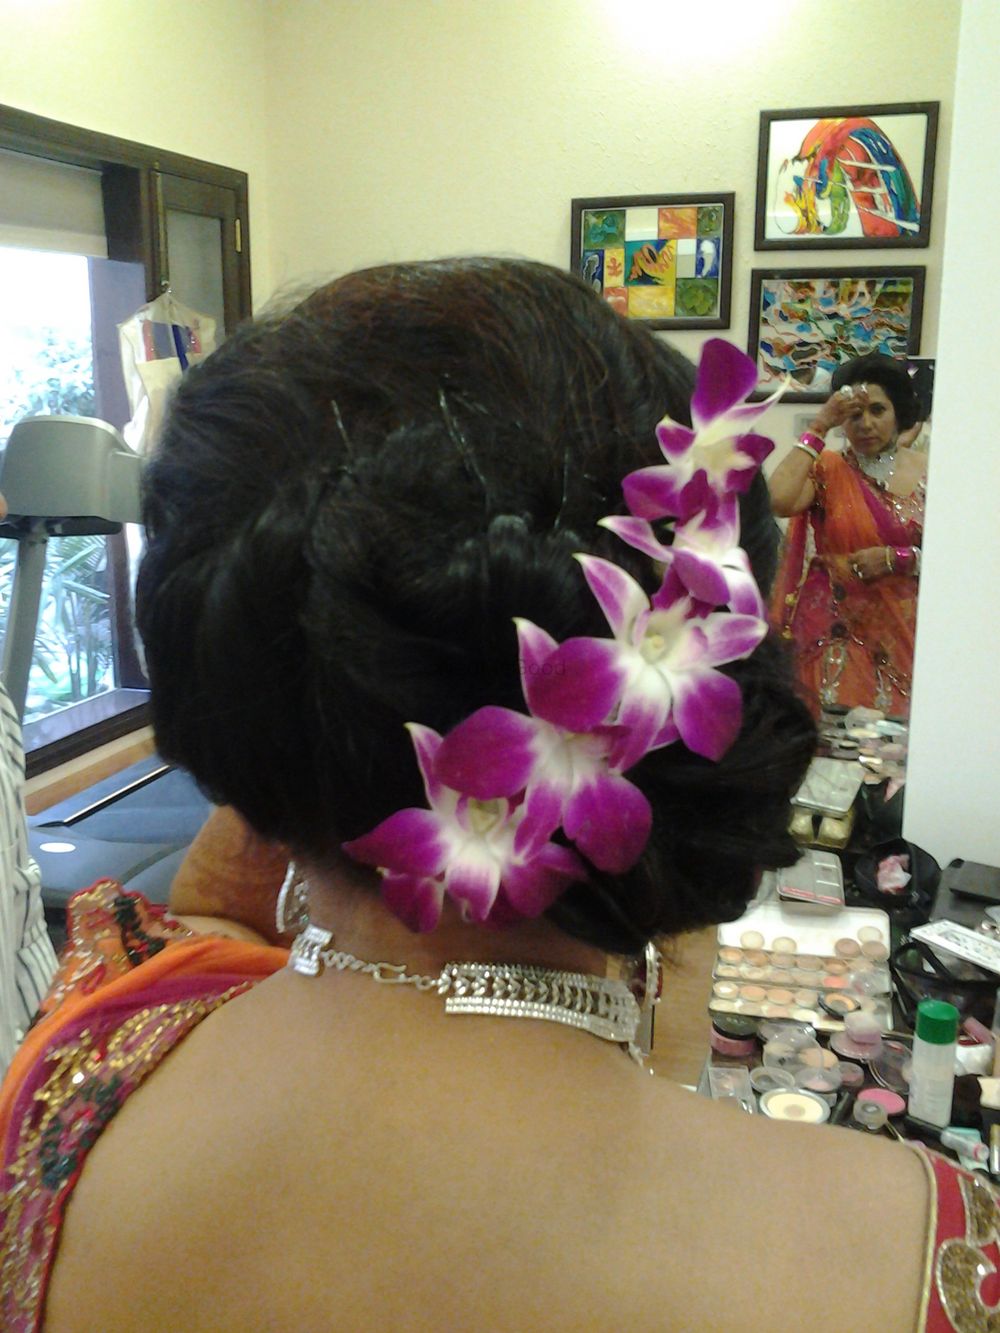 Photo From Some HAIRSTYLES - By Nivritti Chandra